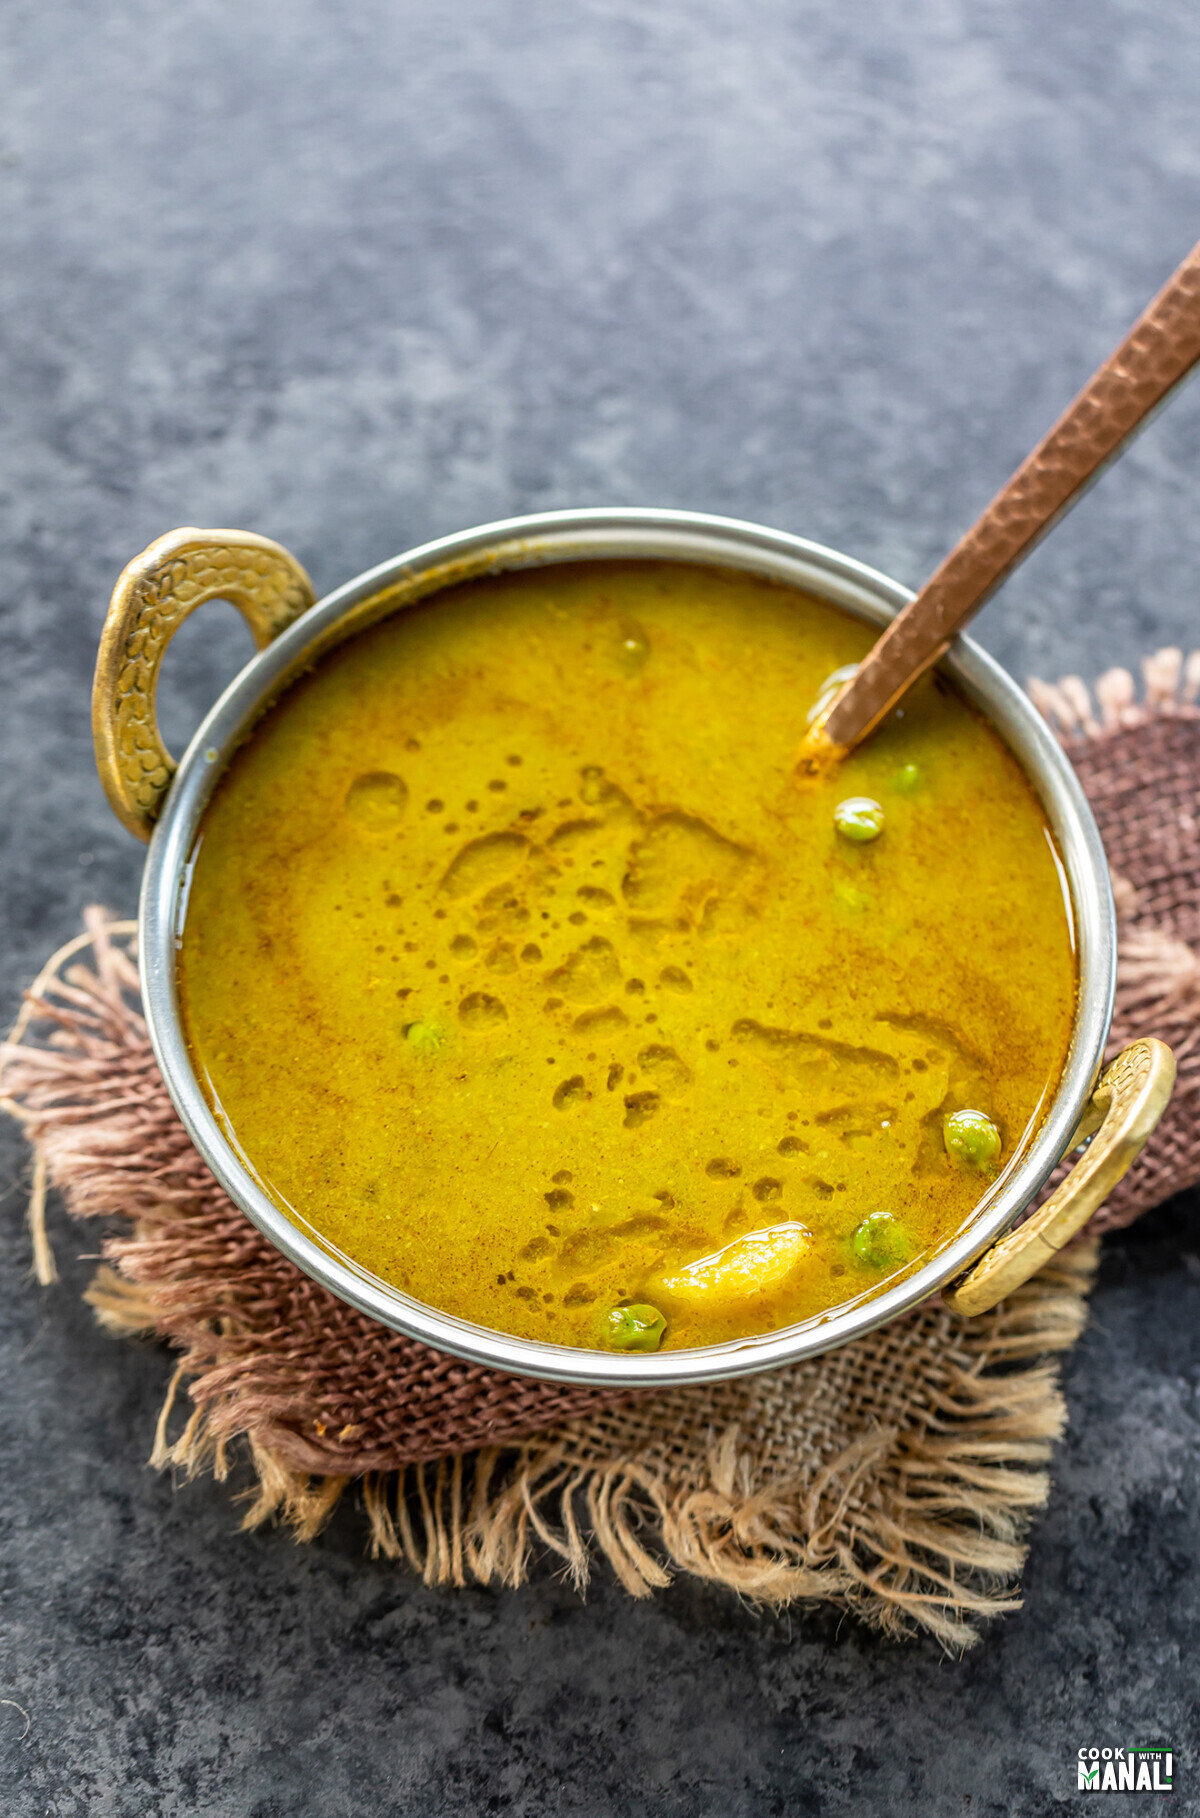 yellow-green curry served in a copper kadai